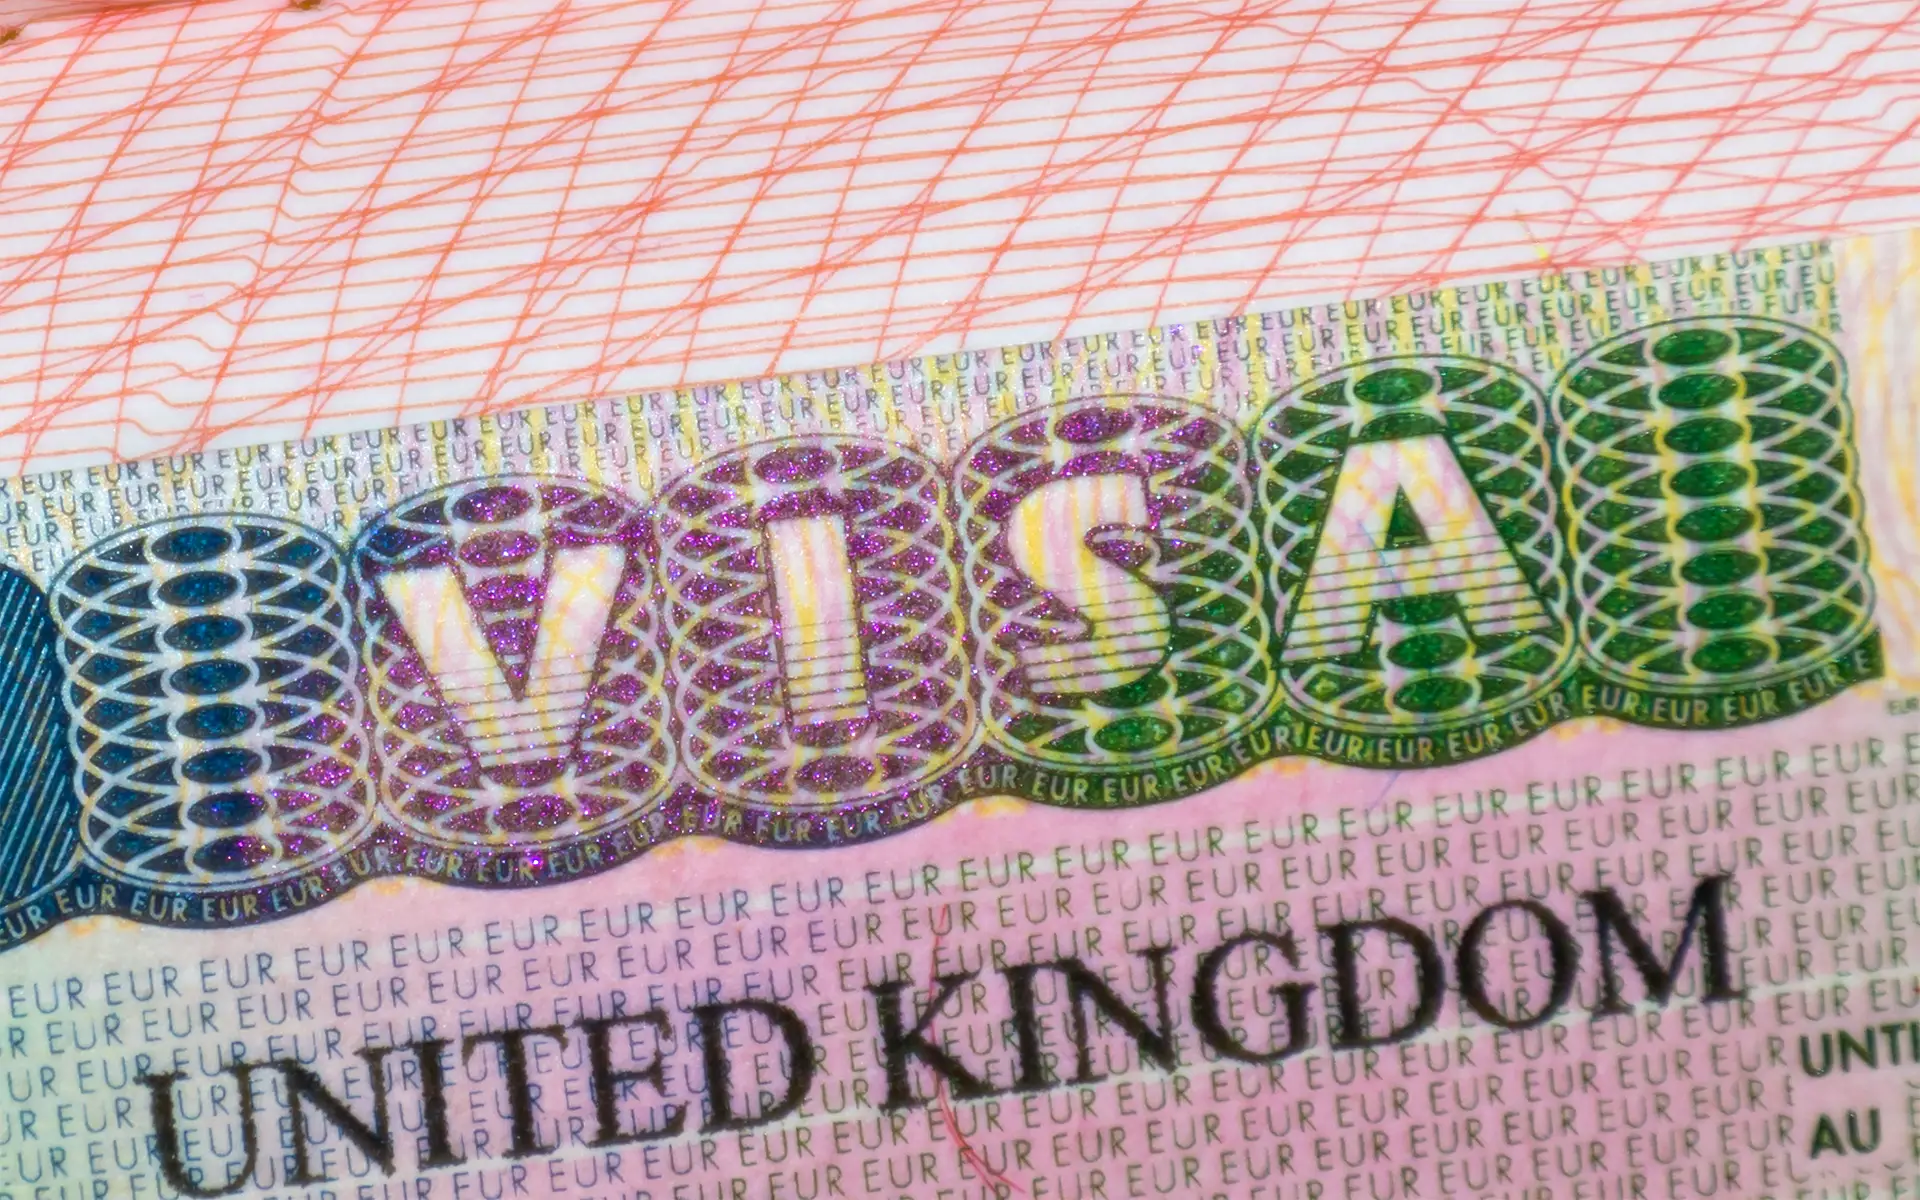 UK implements visa requirements for citizens of five countries, including Dominica and Vanuatu